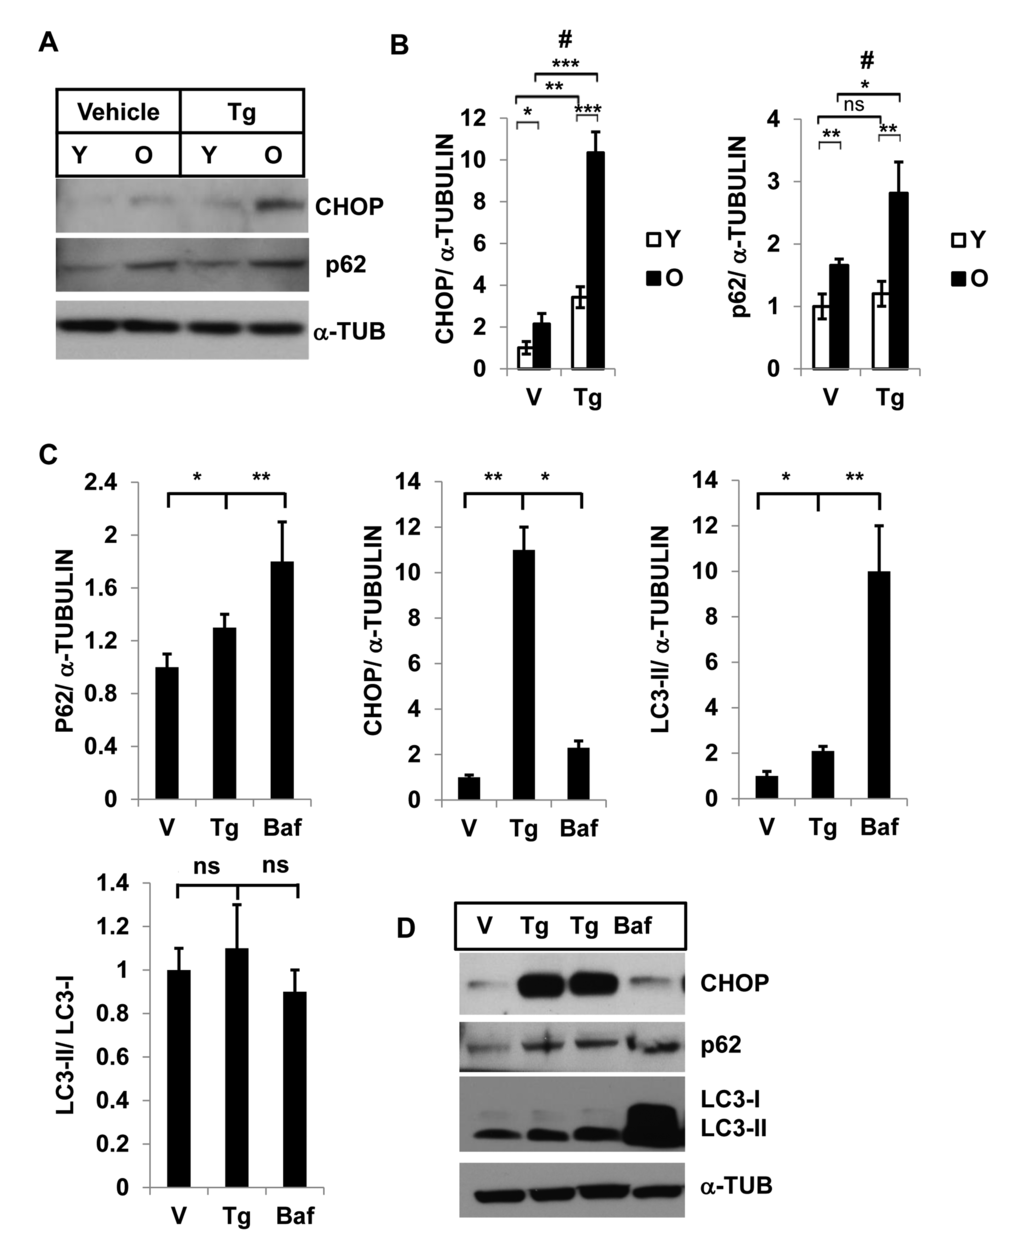 Interaction of autophagy and ER stress response in SVFs from adipose tissue and in 3T3-preadipocytes. Different levels of CHOP and SQSTM1/p62 in SVF lysates from young and old mice with vehicle or Tg treatments. (A) Western blot analysis of ER-stress response protein CHOP and autophagy associated protein SQSTM1/p62 in the SVF lysates from young (n=5) and old mice (n=3) treated with either vehicle (DMSO) or thapsigargin (30 nM) for 18h. The density of protein bands from three independent experiments were plotted in (B). Student’s t-test was performed using means and SD where *pC, D) 3T3-preadipocytes were treated with either vehicle or Tg (30nM) or Baf (10nM) for 18 hrs and the protein levels of p62, CHOP and LC3-II were analyzed by western blots (D). The relative density of protein bands for P62, CHOP, LC3-II were plotted (C) after normalization with α-Tubulin. Student’s t-test was performed and *p